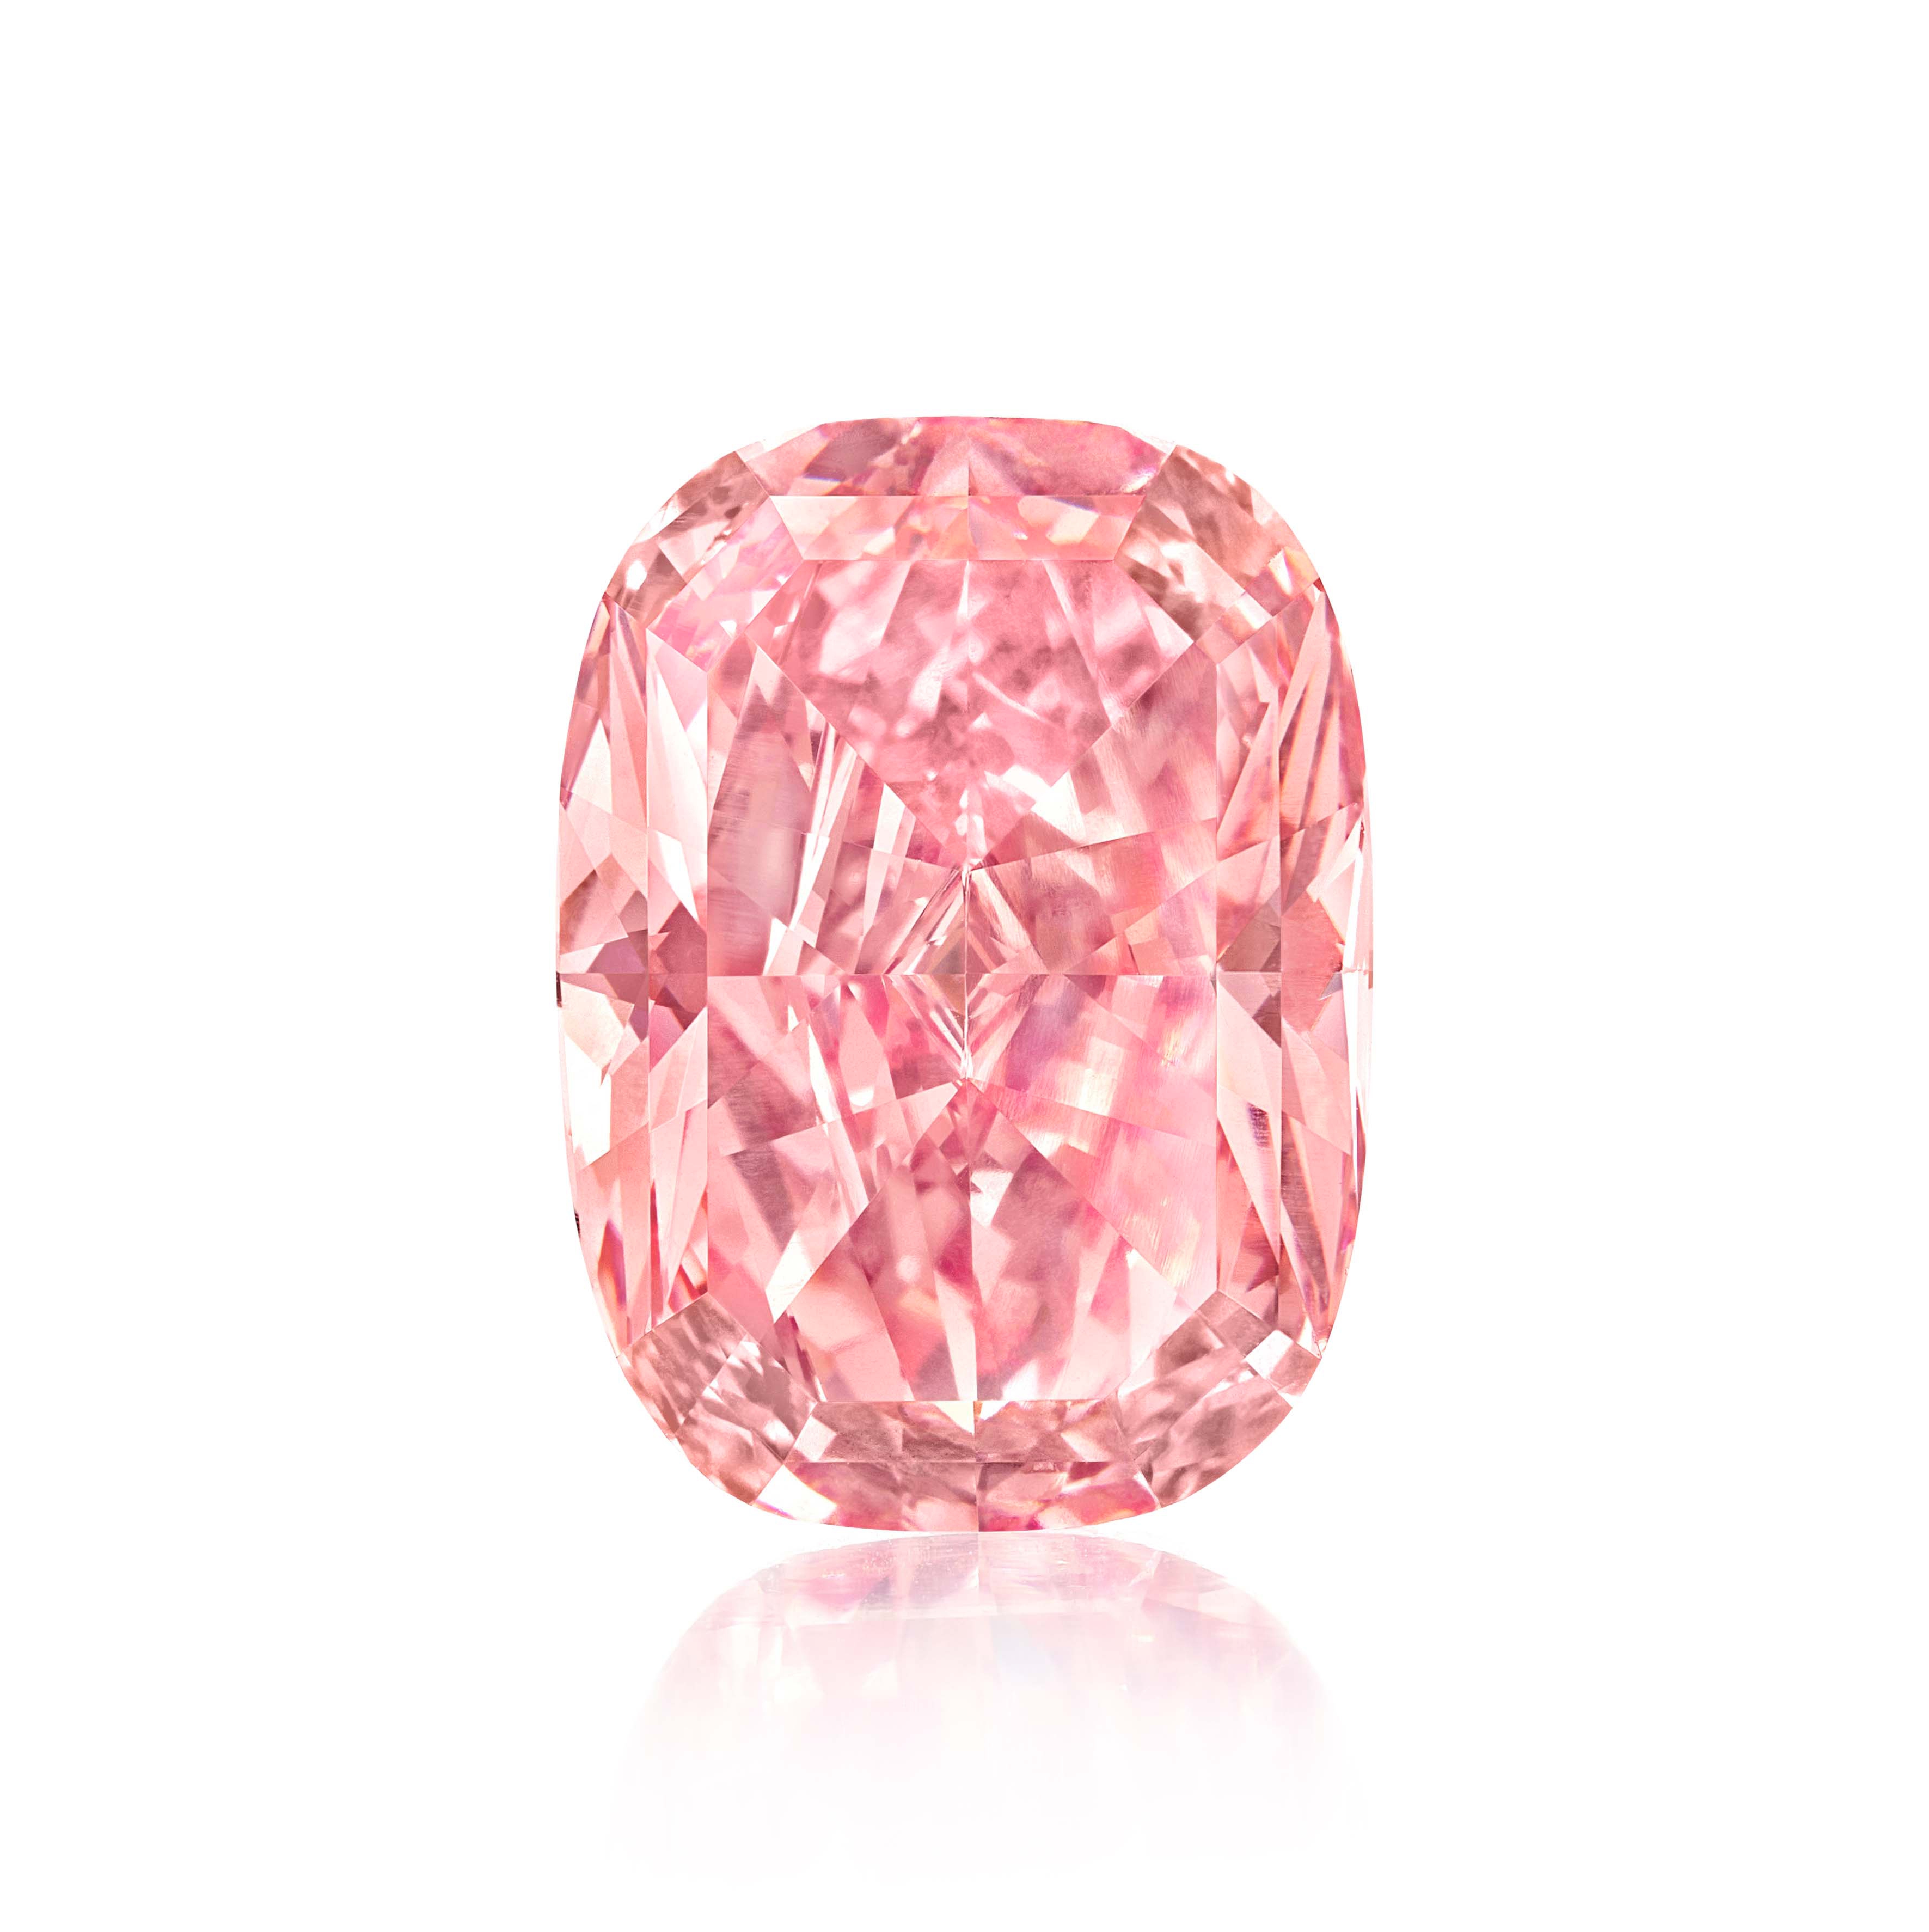 Williamson "Pink Star" Sets World Record For Highest Price per Carat